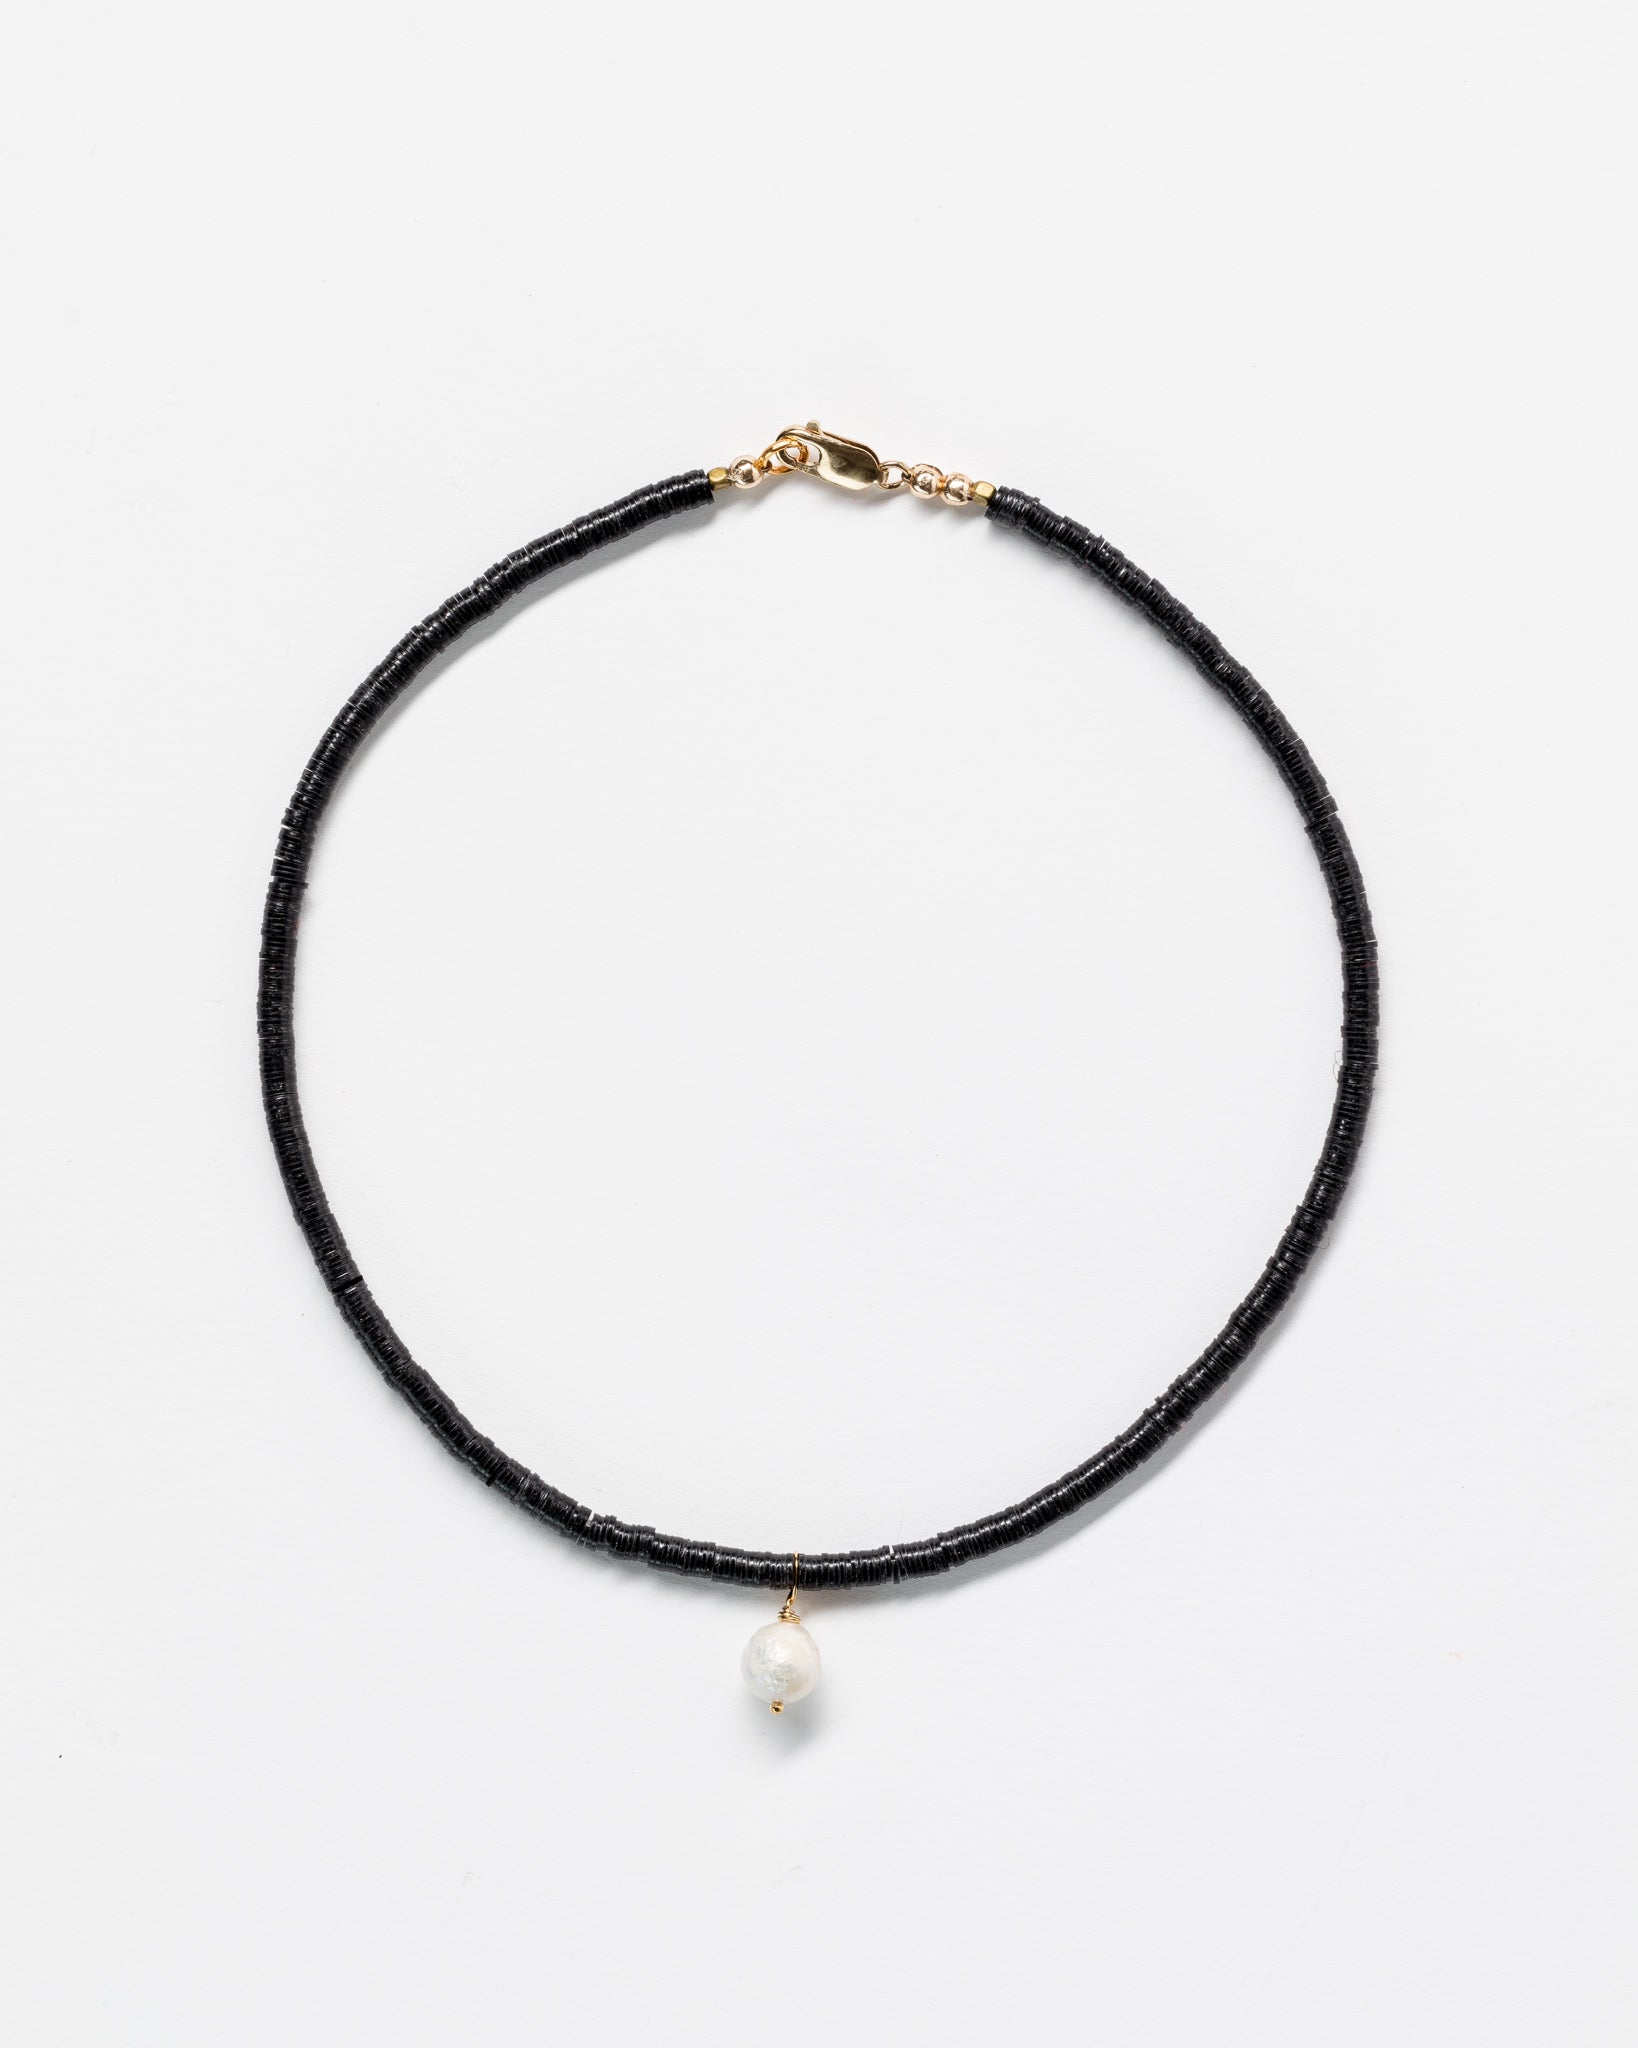 A simple black Designs By Raya choker necklace with a single pearl pendant and a gold clasp, displayed against a plain white background in Arizona style.